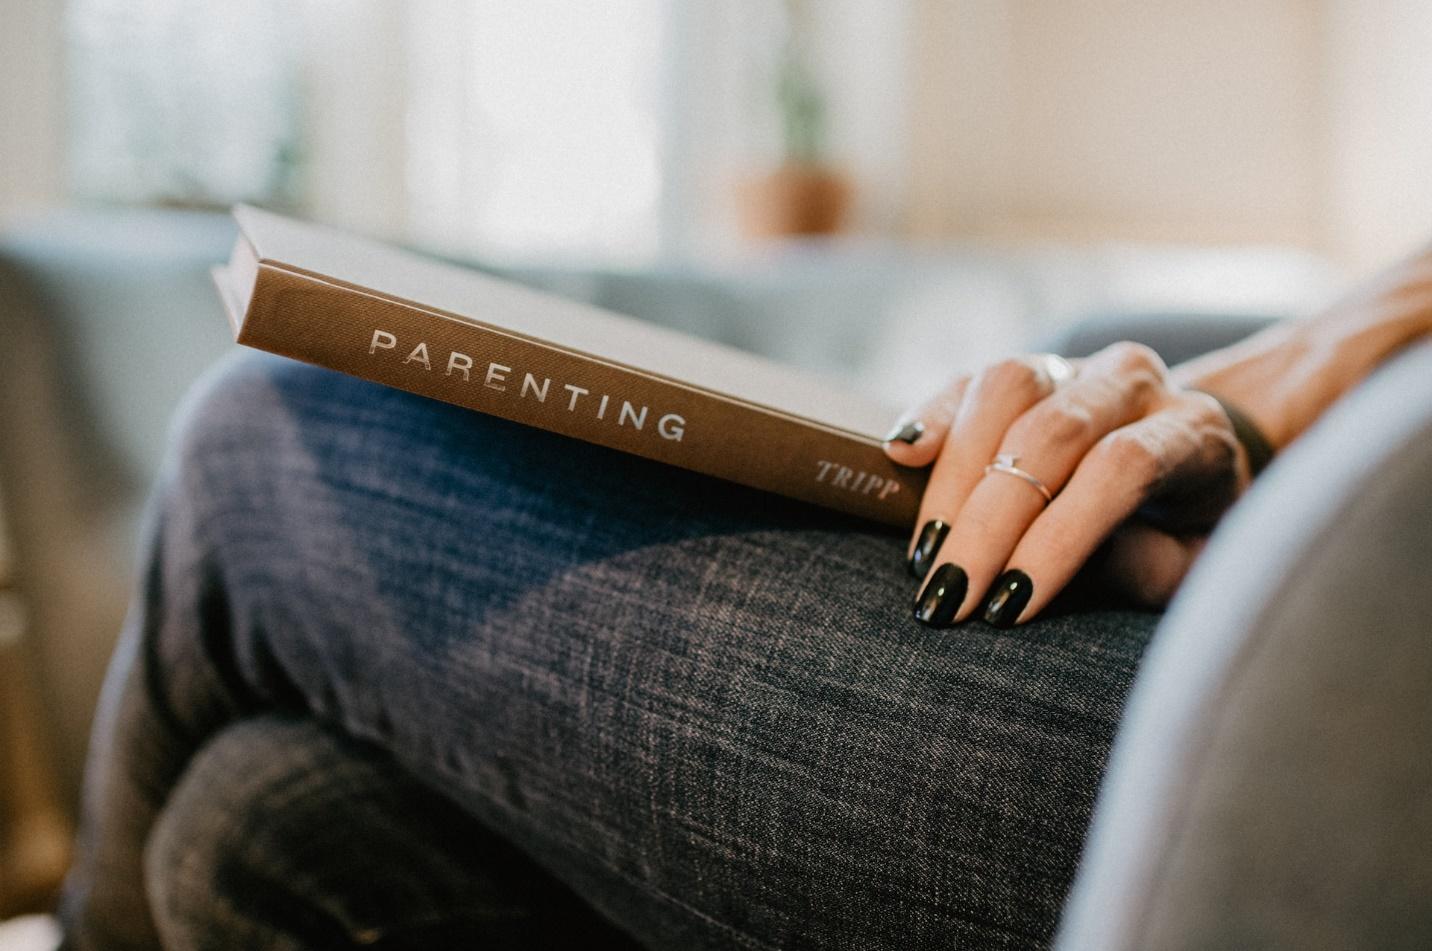 A person holding a parenting book